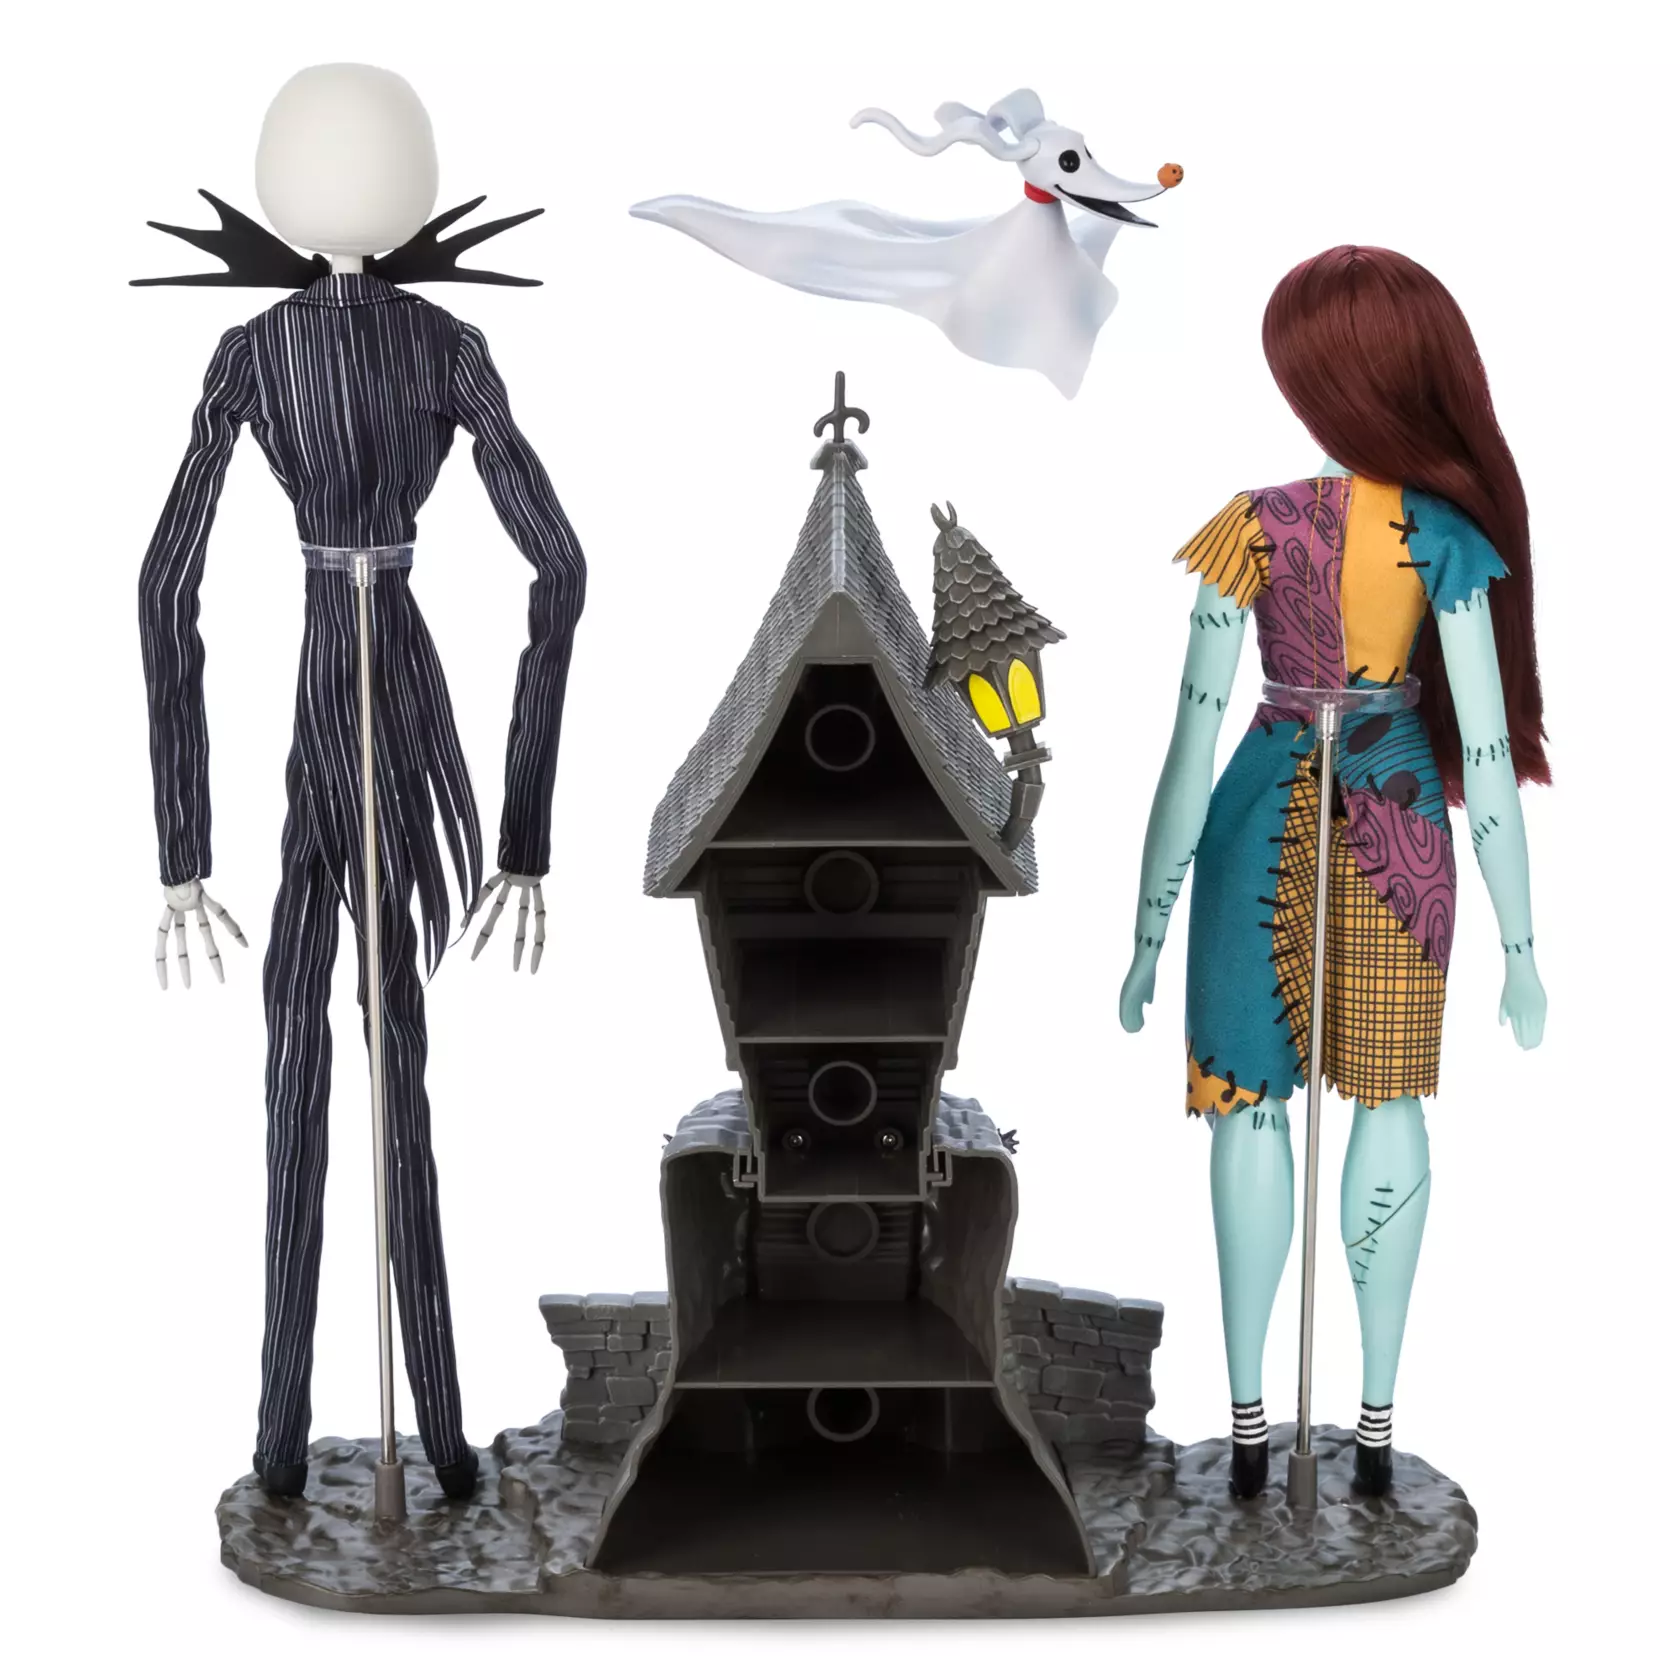 The Nightmare Before Christmas Little People Collector Figure Pack